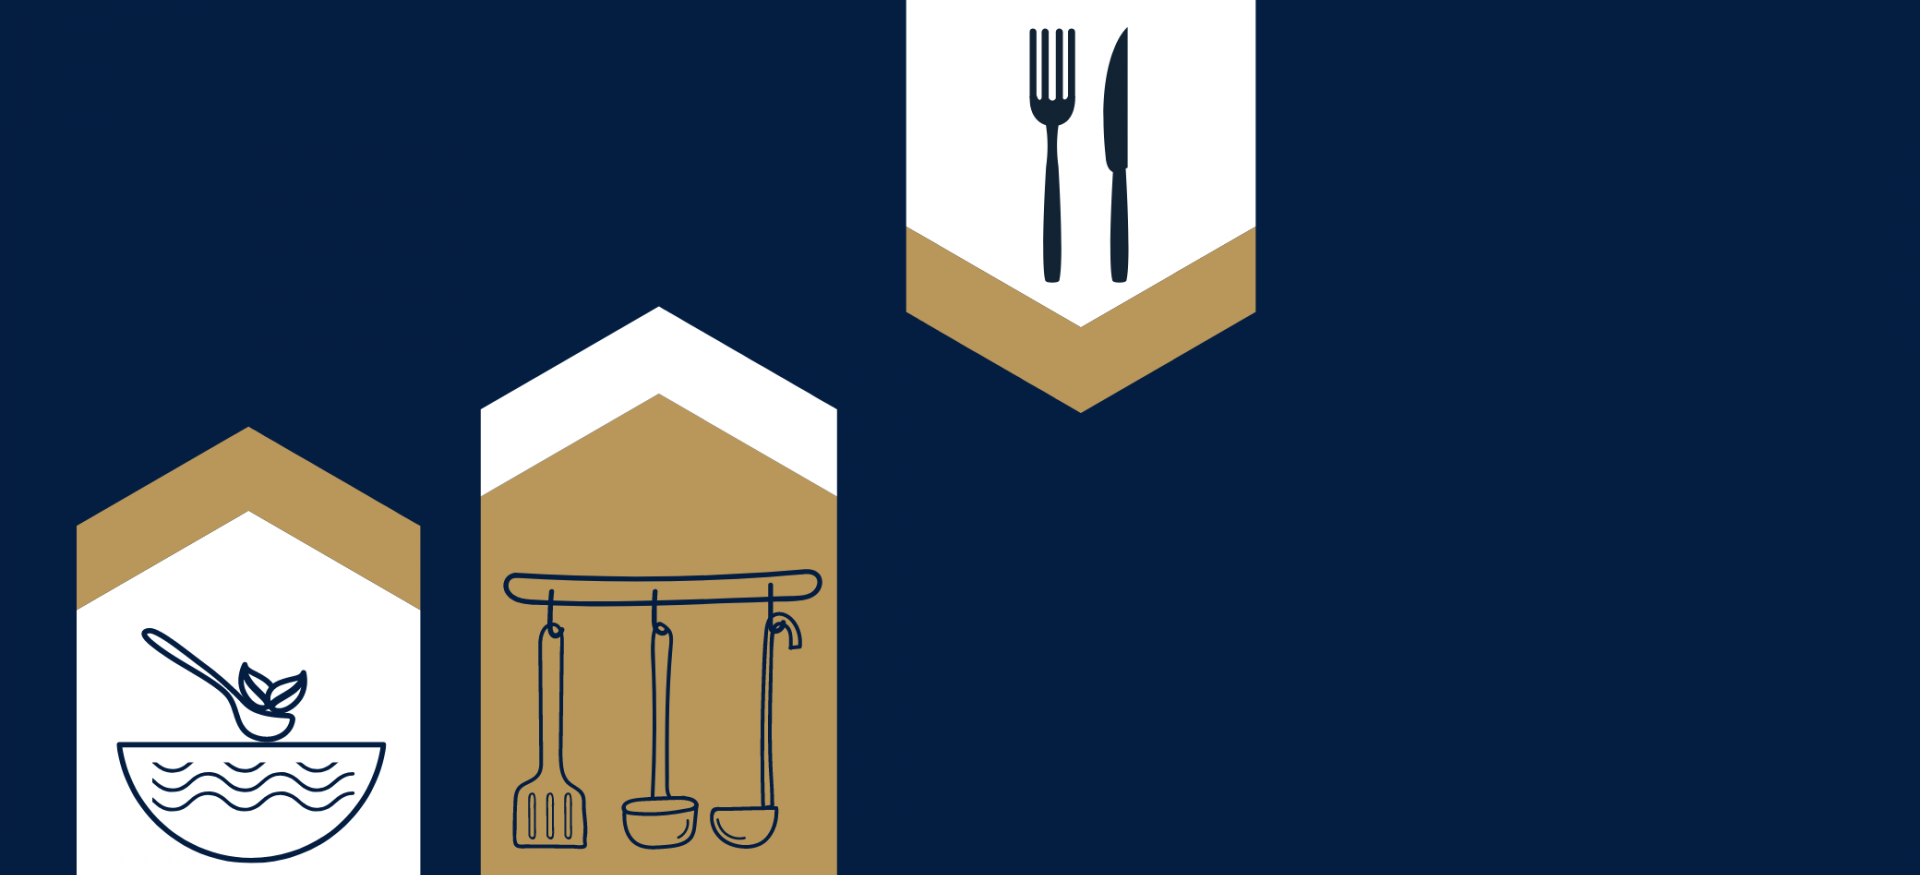 A graphic in dark blue with outlines of a cooking pot and a chopping board with knife and vegetables.